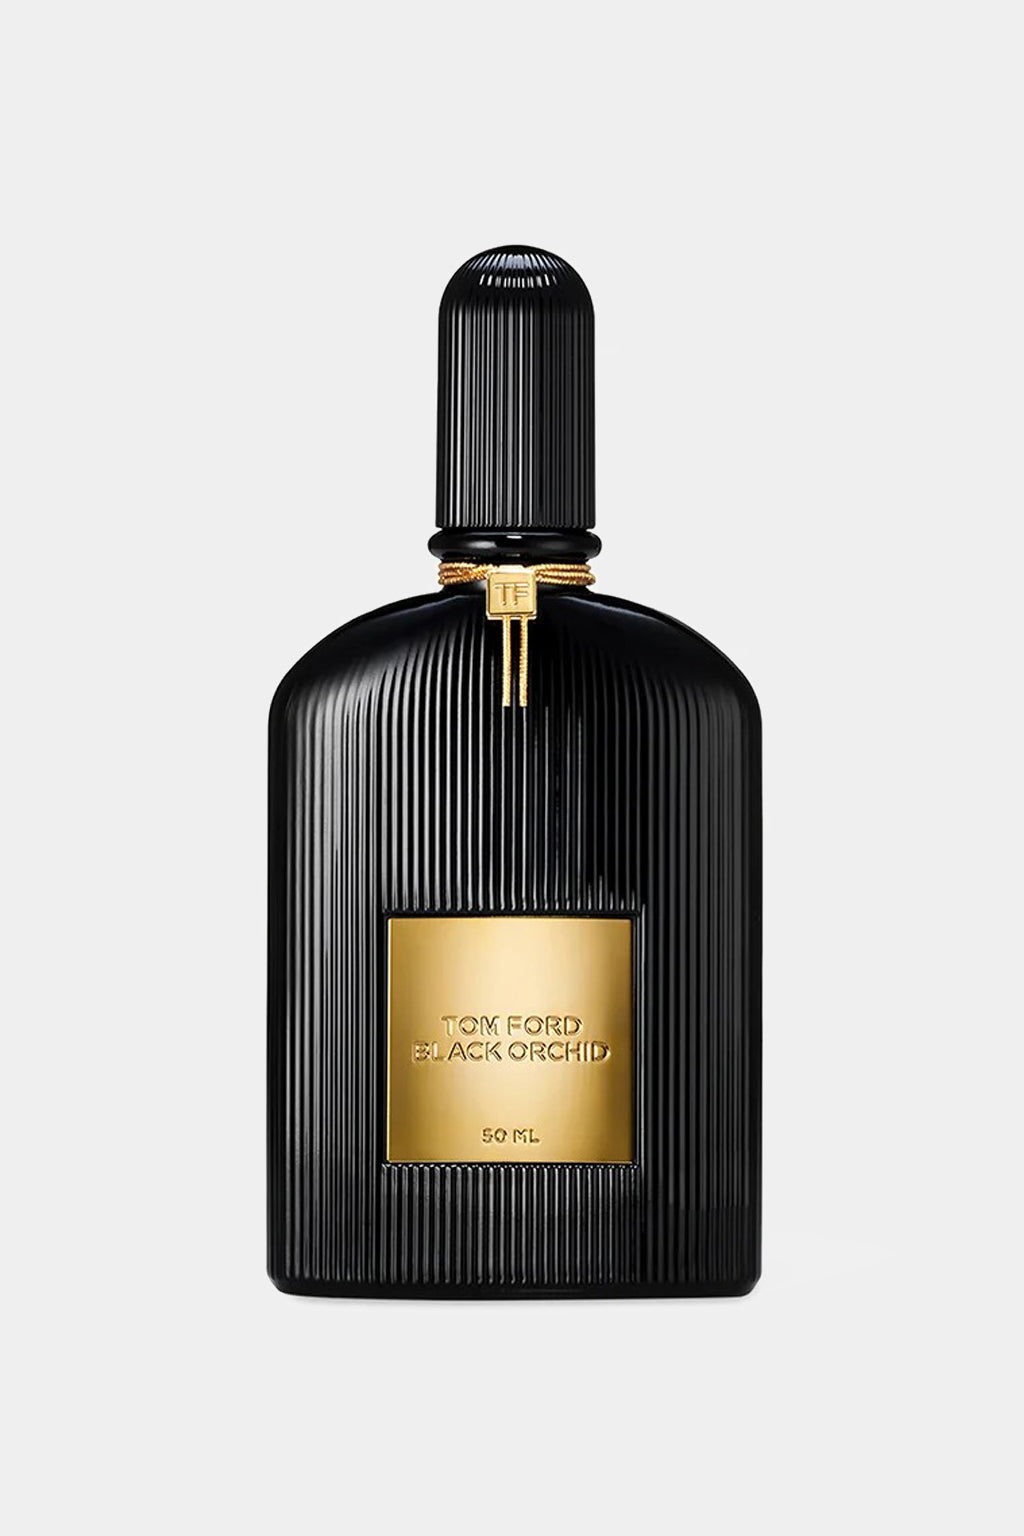 Tom Ford - Black Orchid Perfume